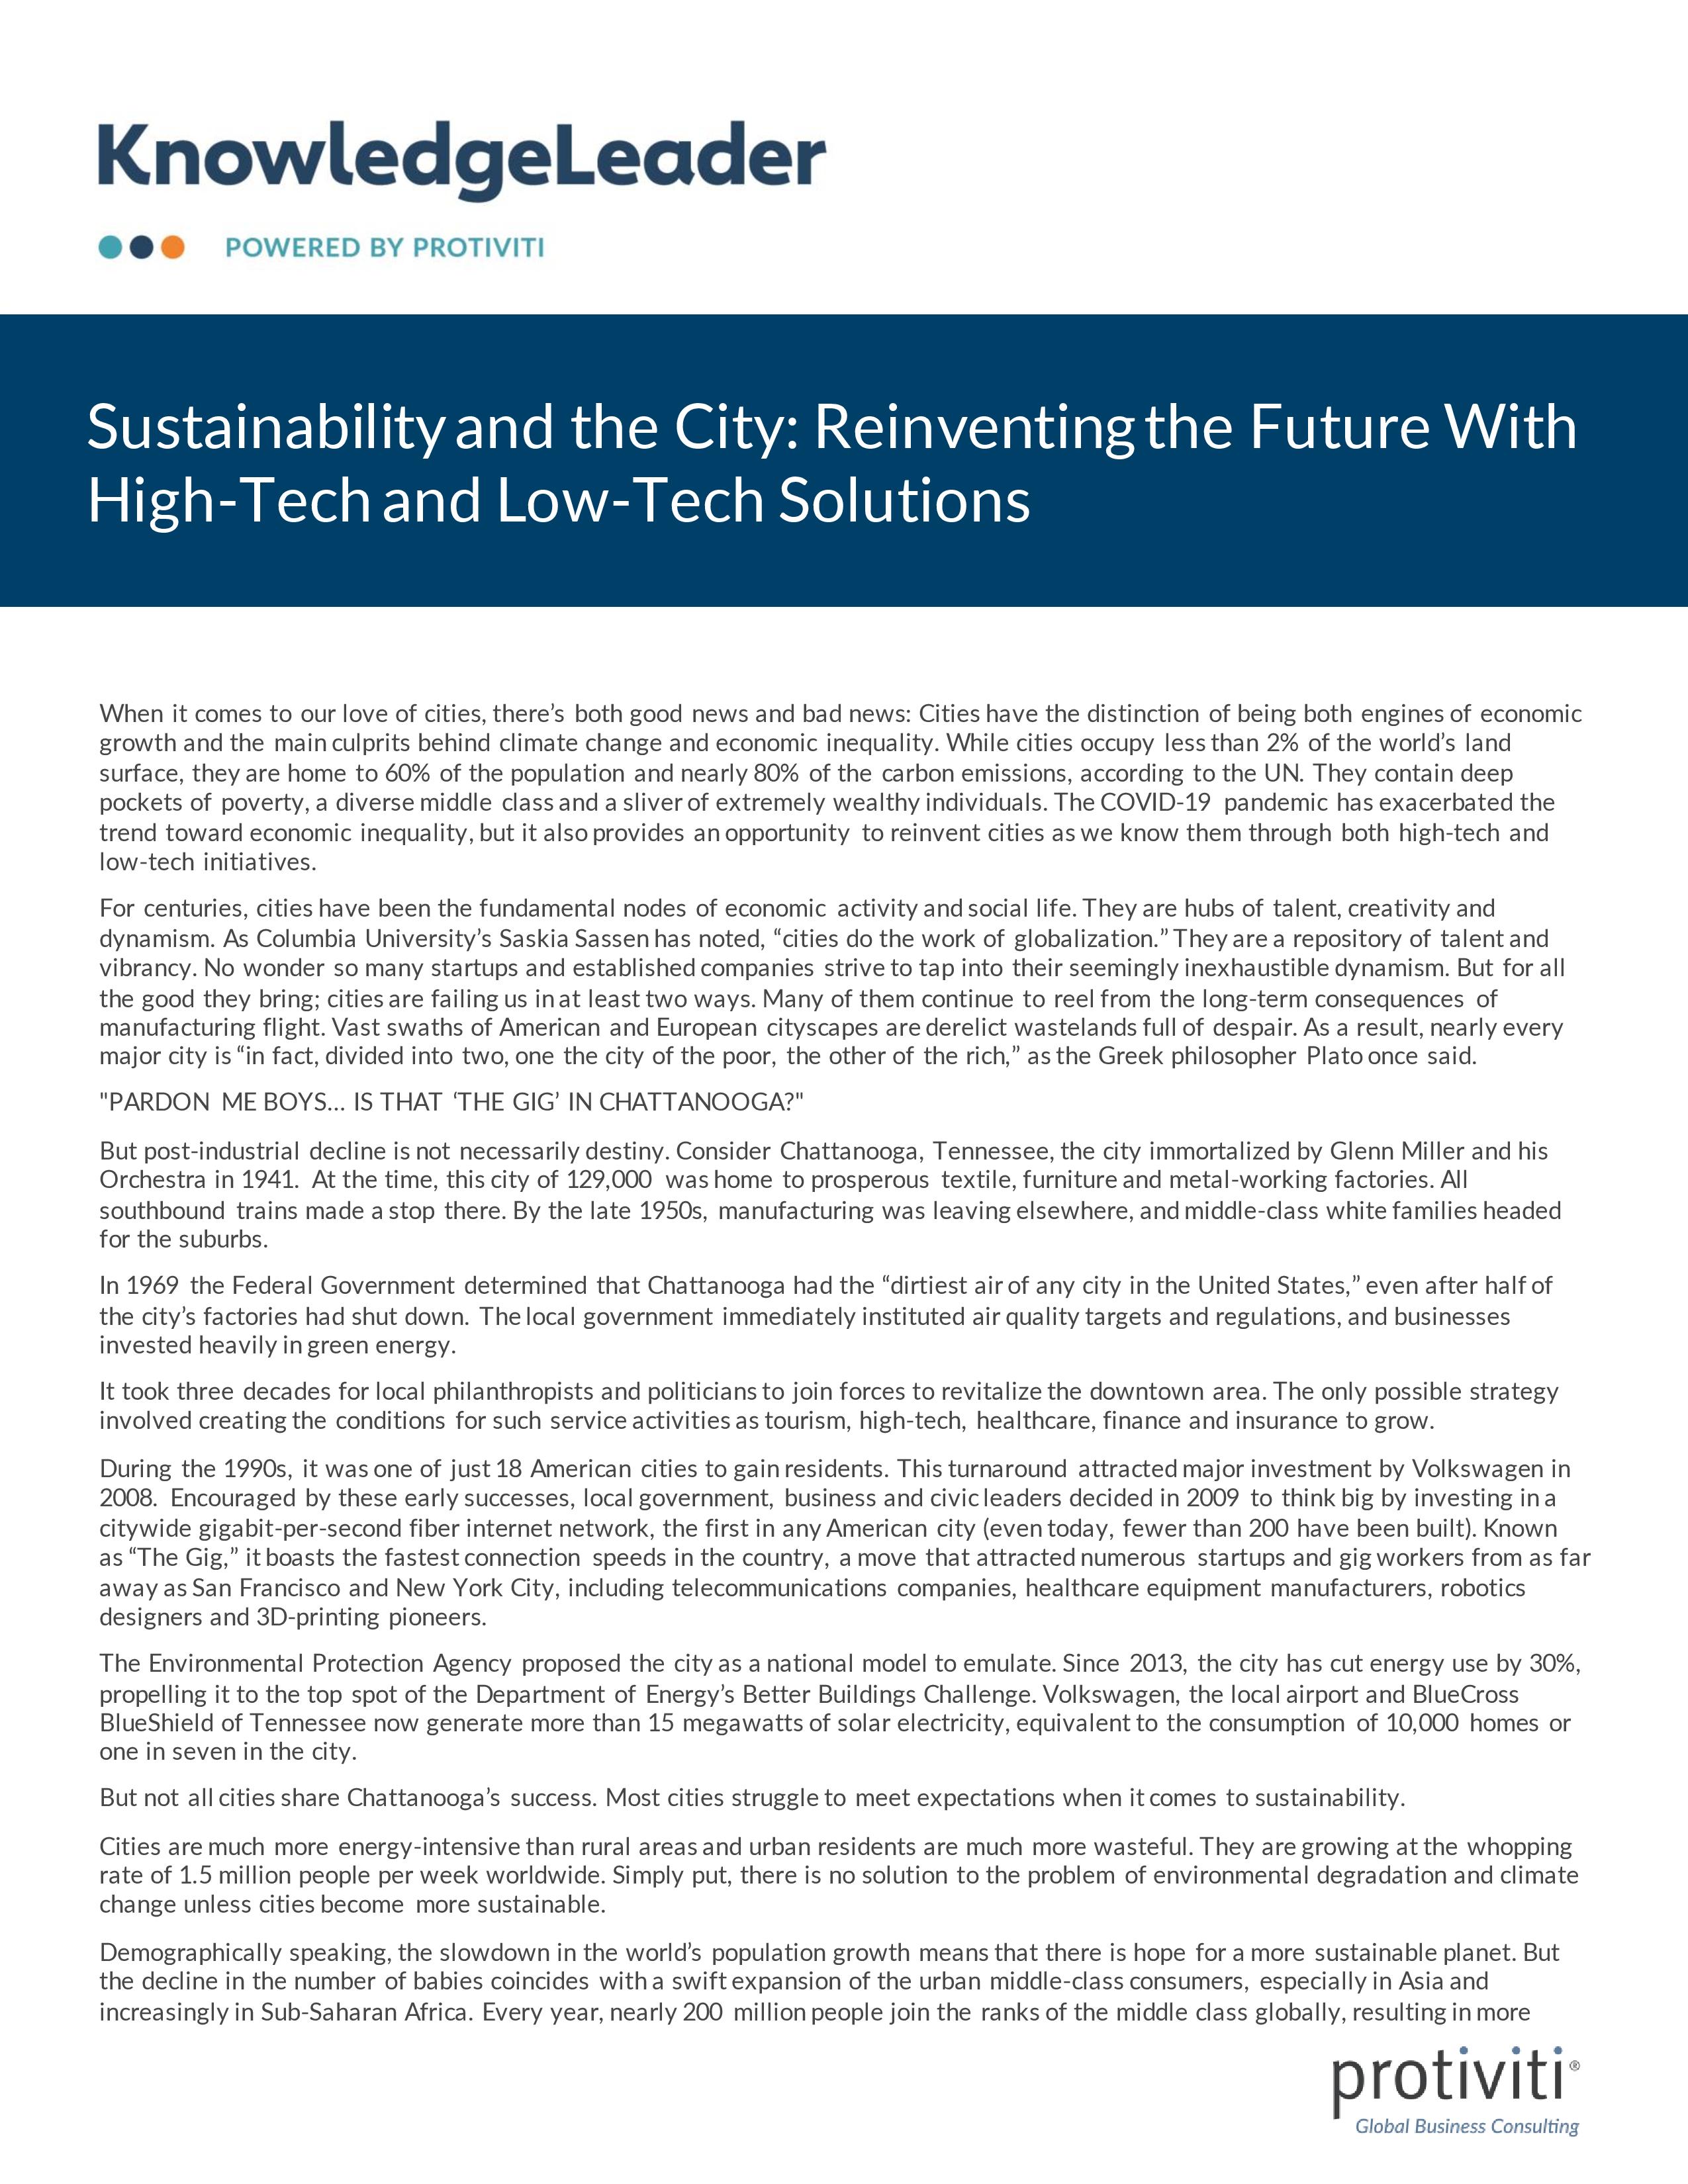 Screenshot of the first page of Sustainability and the City Reinventing the Future With High-Tech and Low-Tech Solutions